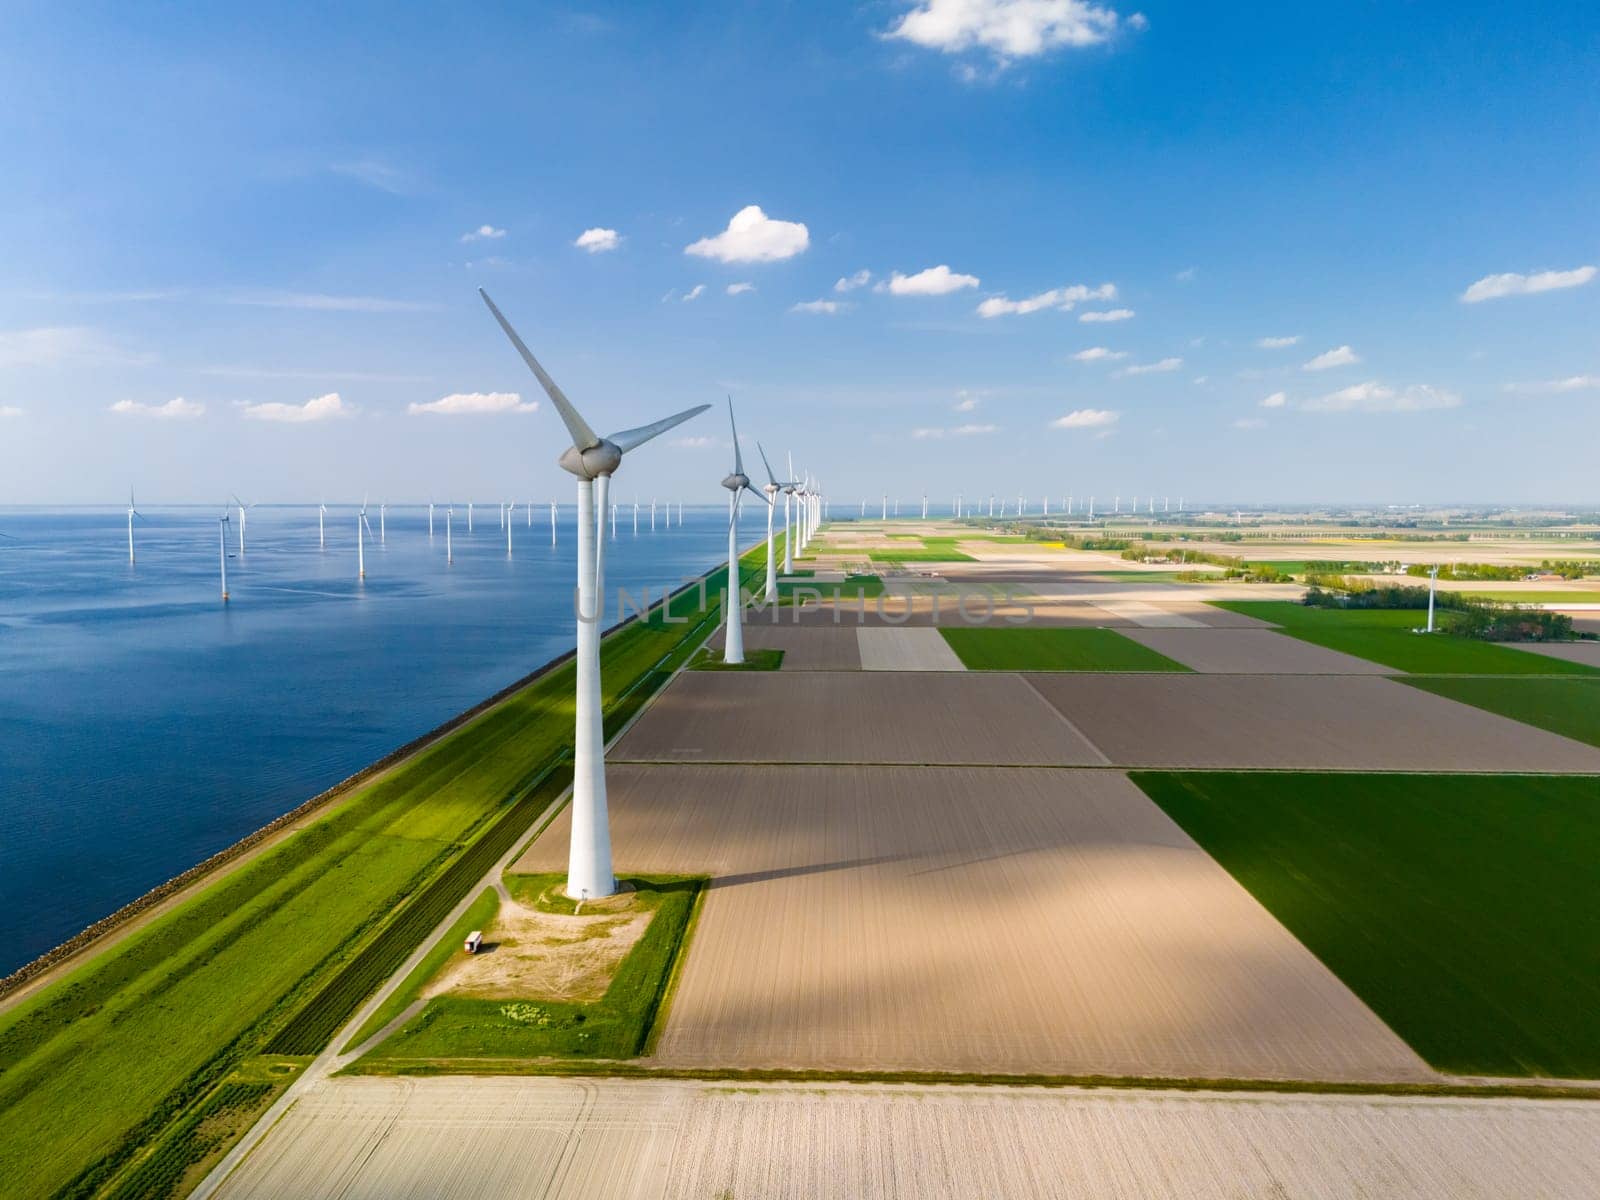 A breathtaking aerial view captures a wind farm in the Netherlands Flevoland region, with rows of majestic windmill turbines gracefully turning near the ocean by fokkebok